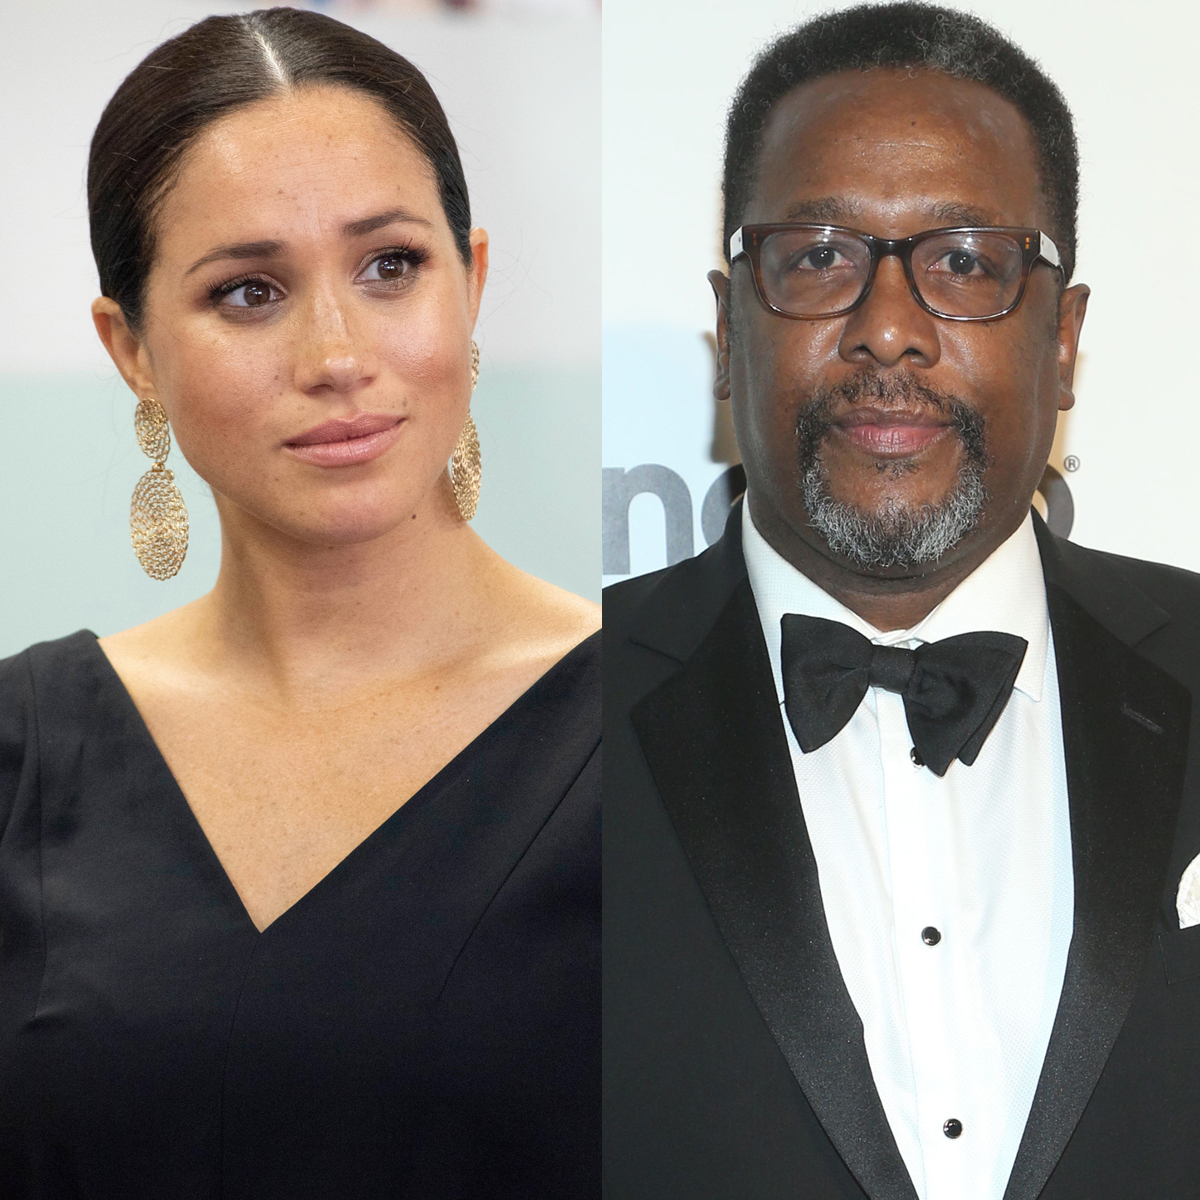 Meghan Markle’s TV Father Traces Back to ‘Insignificant’ Comment